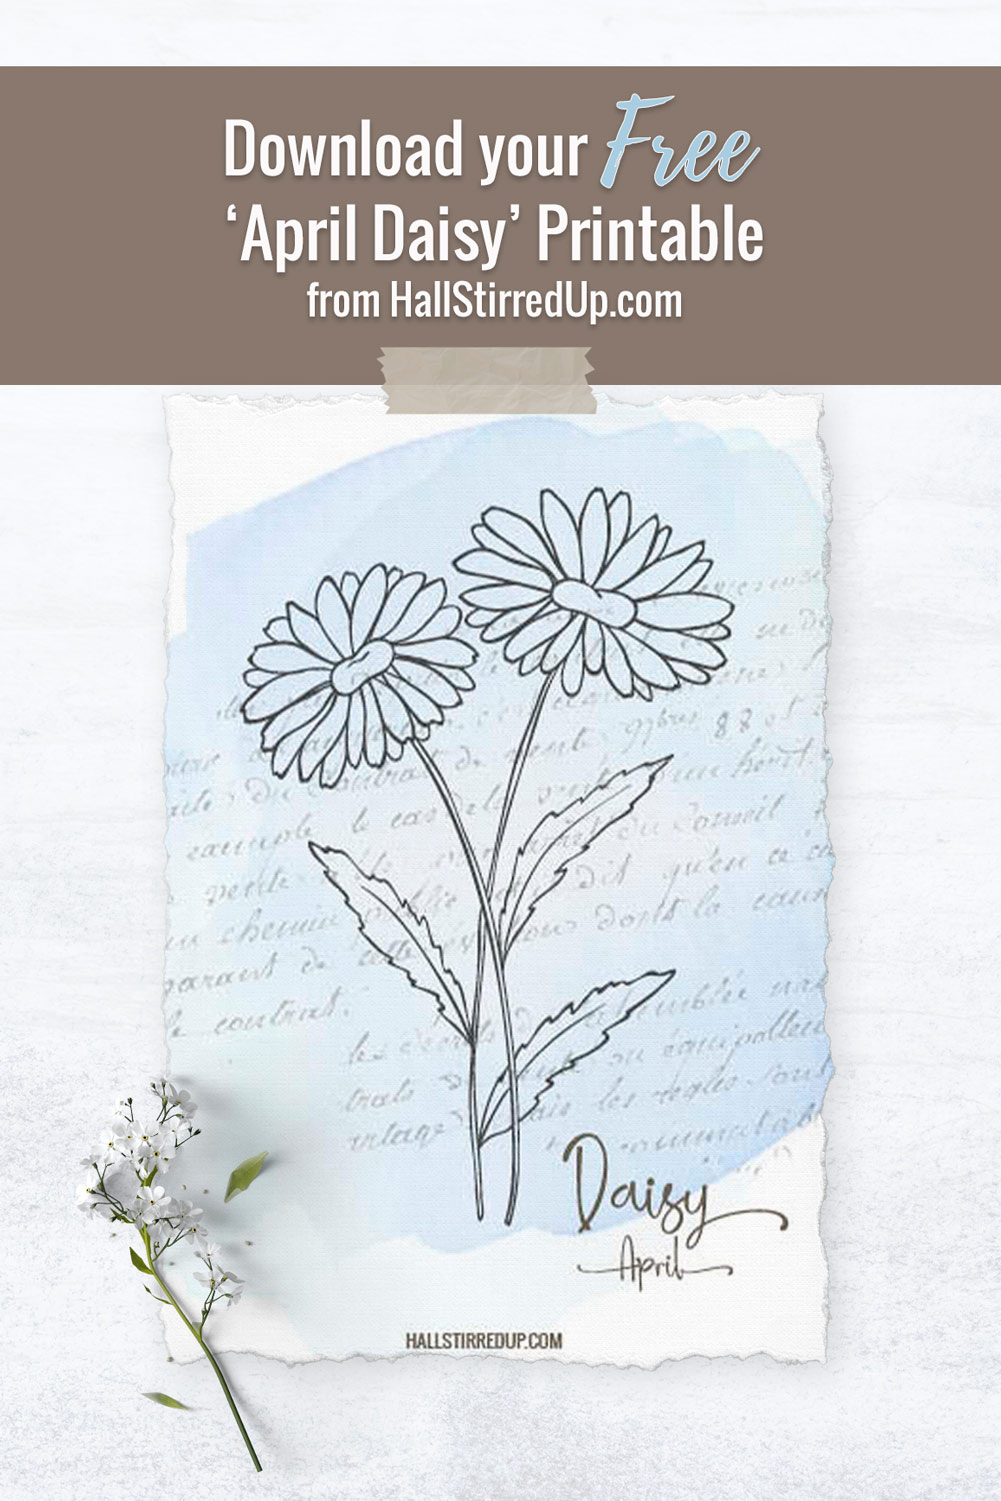 April's Birth Flower is the pretty Daisy and includes a free printable!